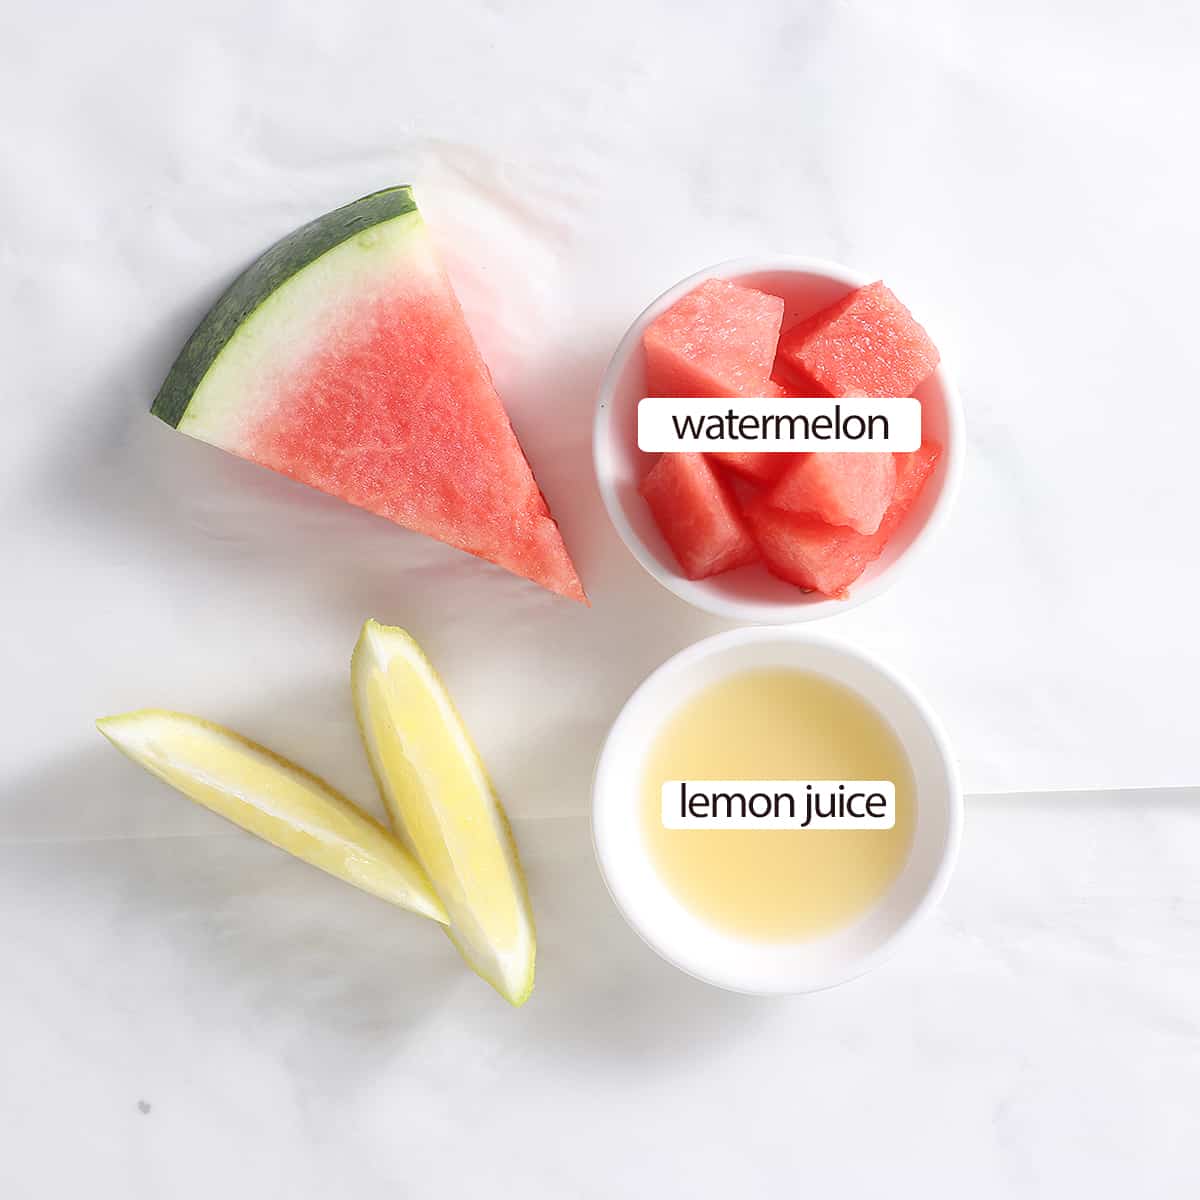 watermelon and lemon juice in cups